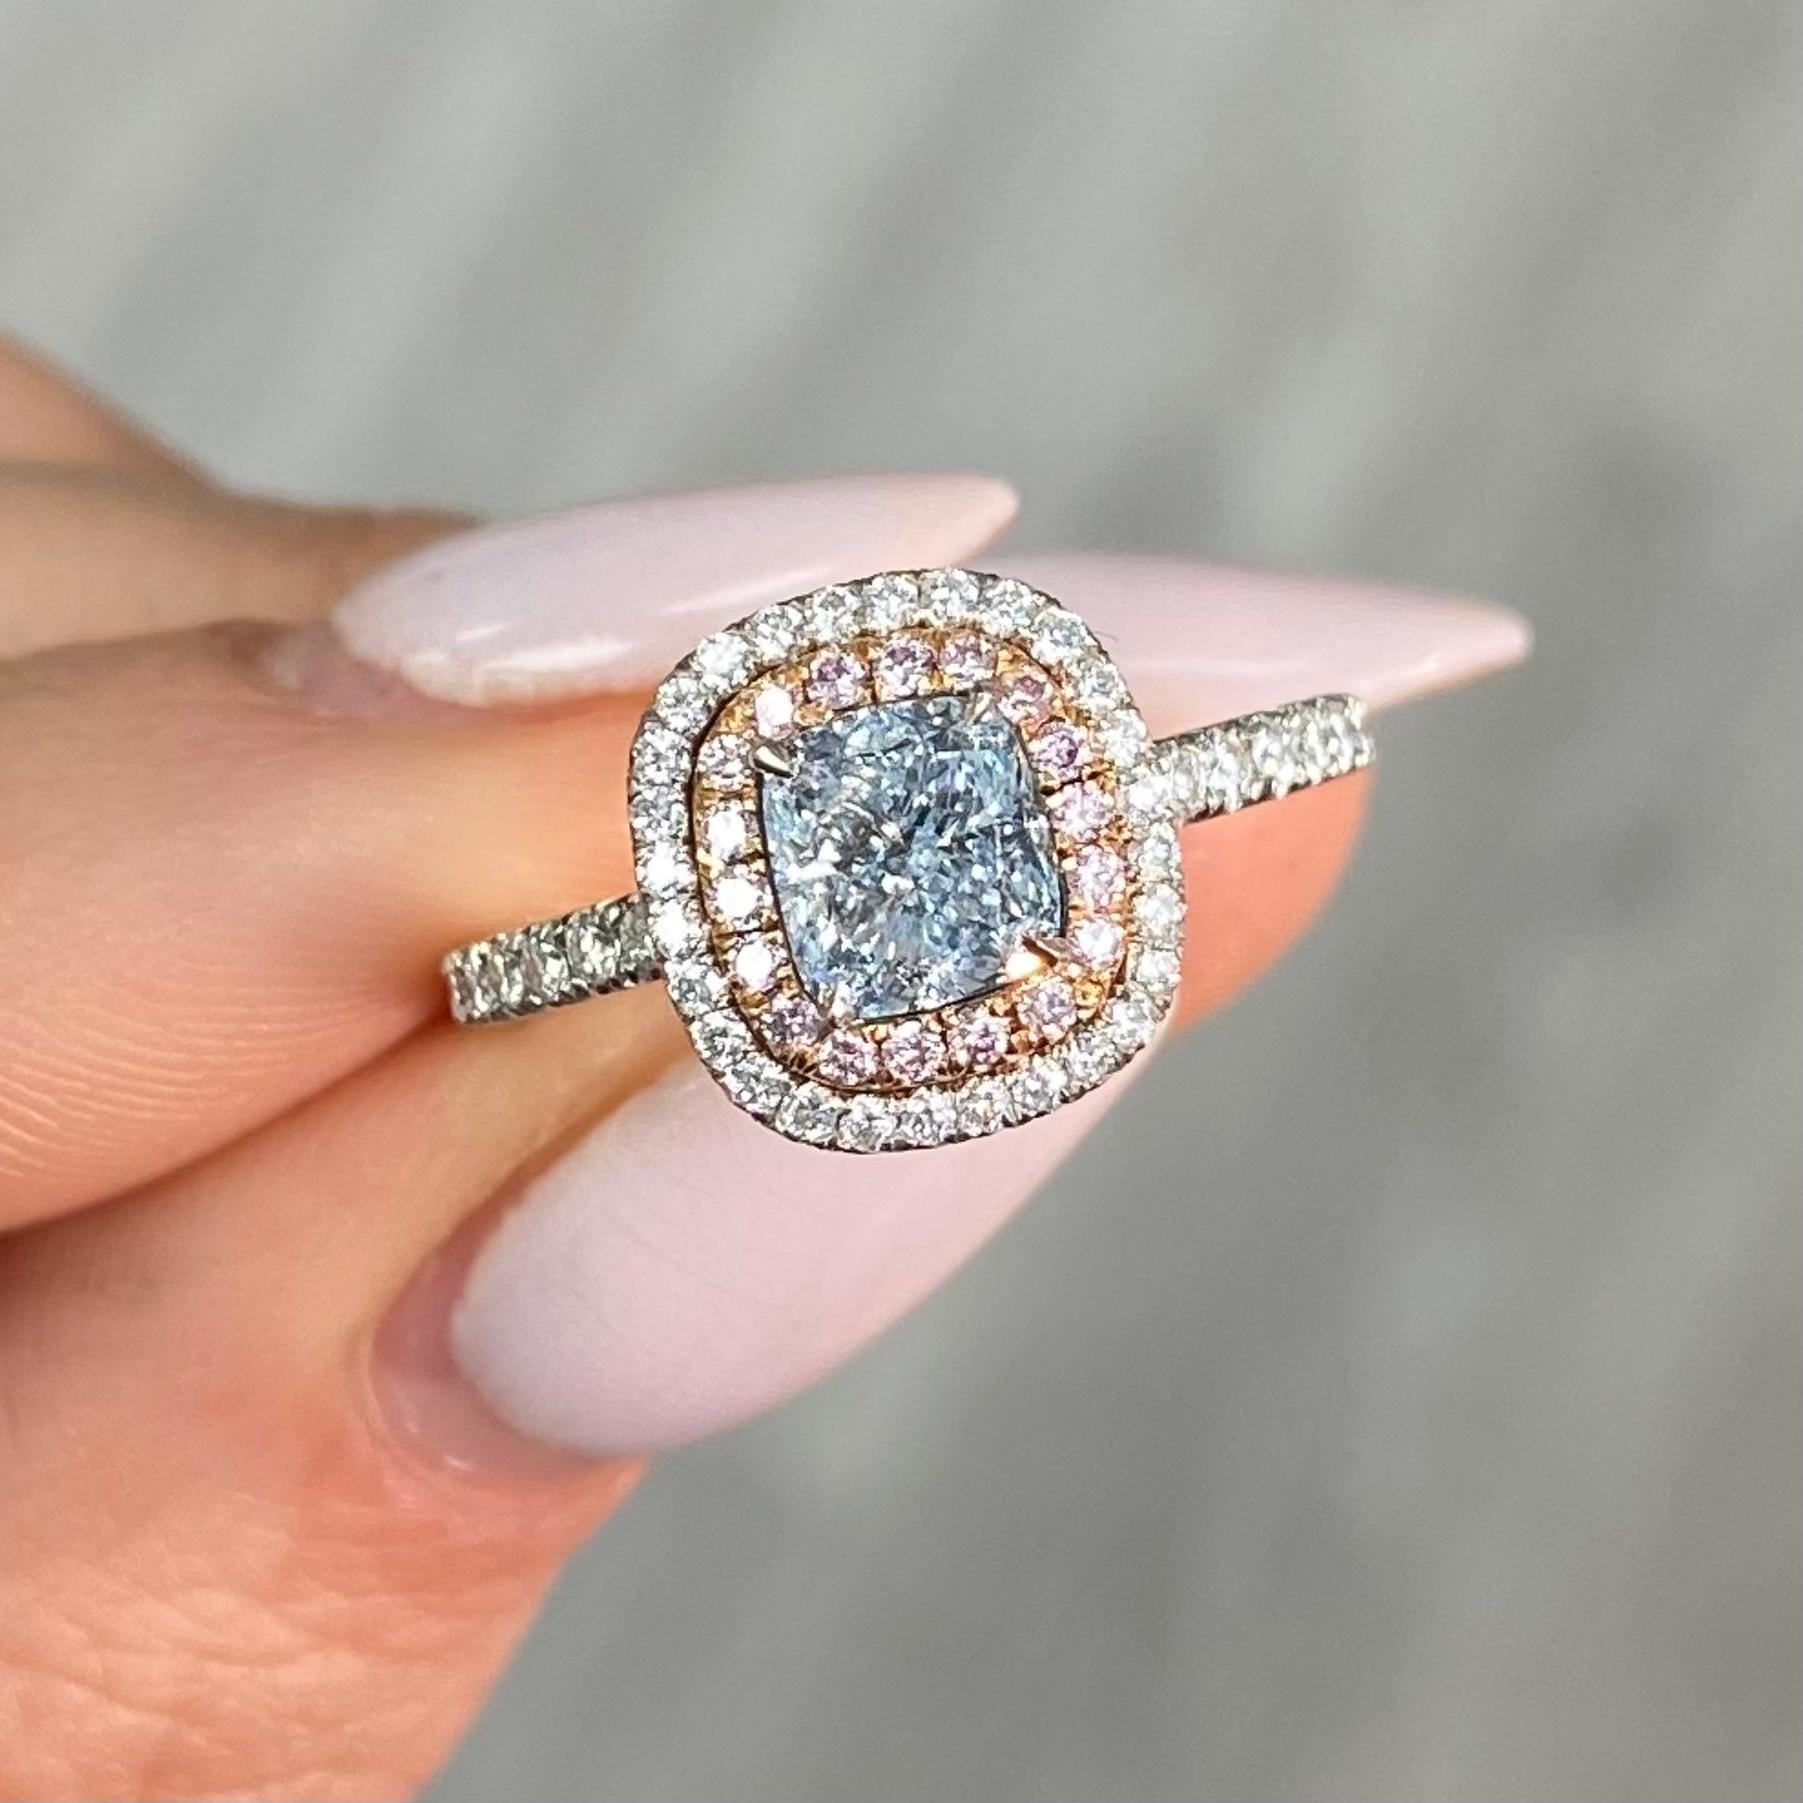 Rare and beautiful 1ct Fancy Light Blue Cushion, full of color and life, sweet blue
100% eye clean
Set in a platinum and Rose Gold ring with Pink and White surrounding diamonds
This piece can be viewed before purchase in our showroom in NYC or at